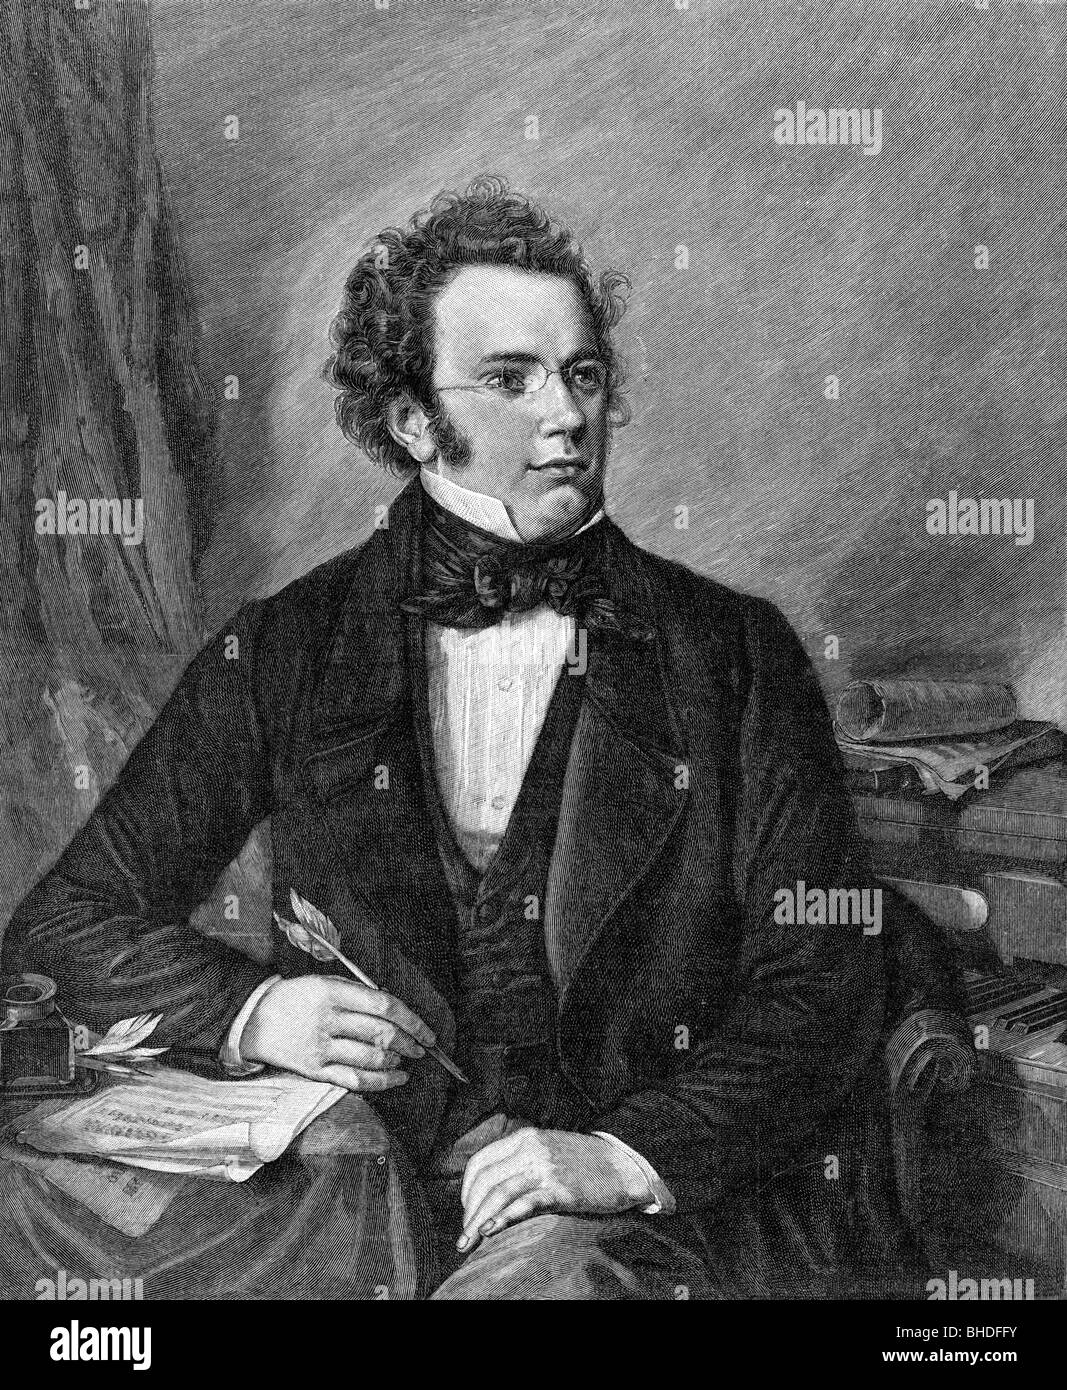 Schubert, Franz, 31.1.1797 - 19.11.1828, Austrian composer, half length,  after painting by Rieder, 1825, wood engraving, 19th century Stock Photo -  Alamy